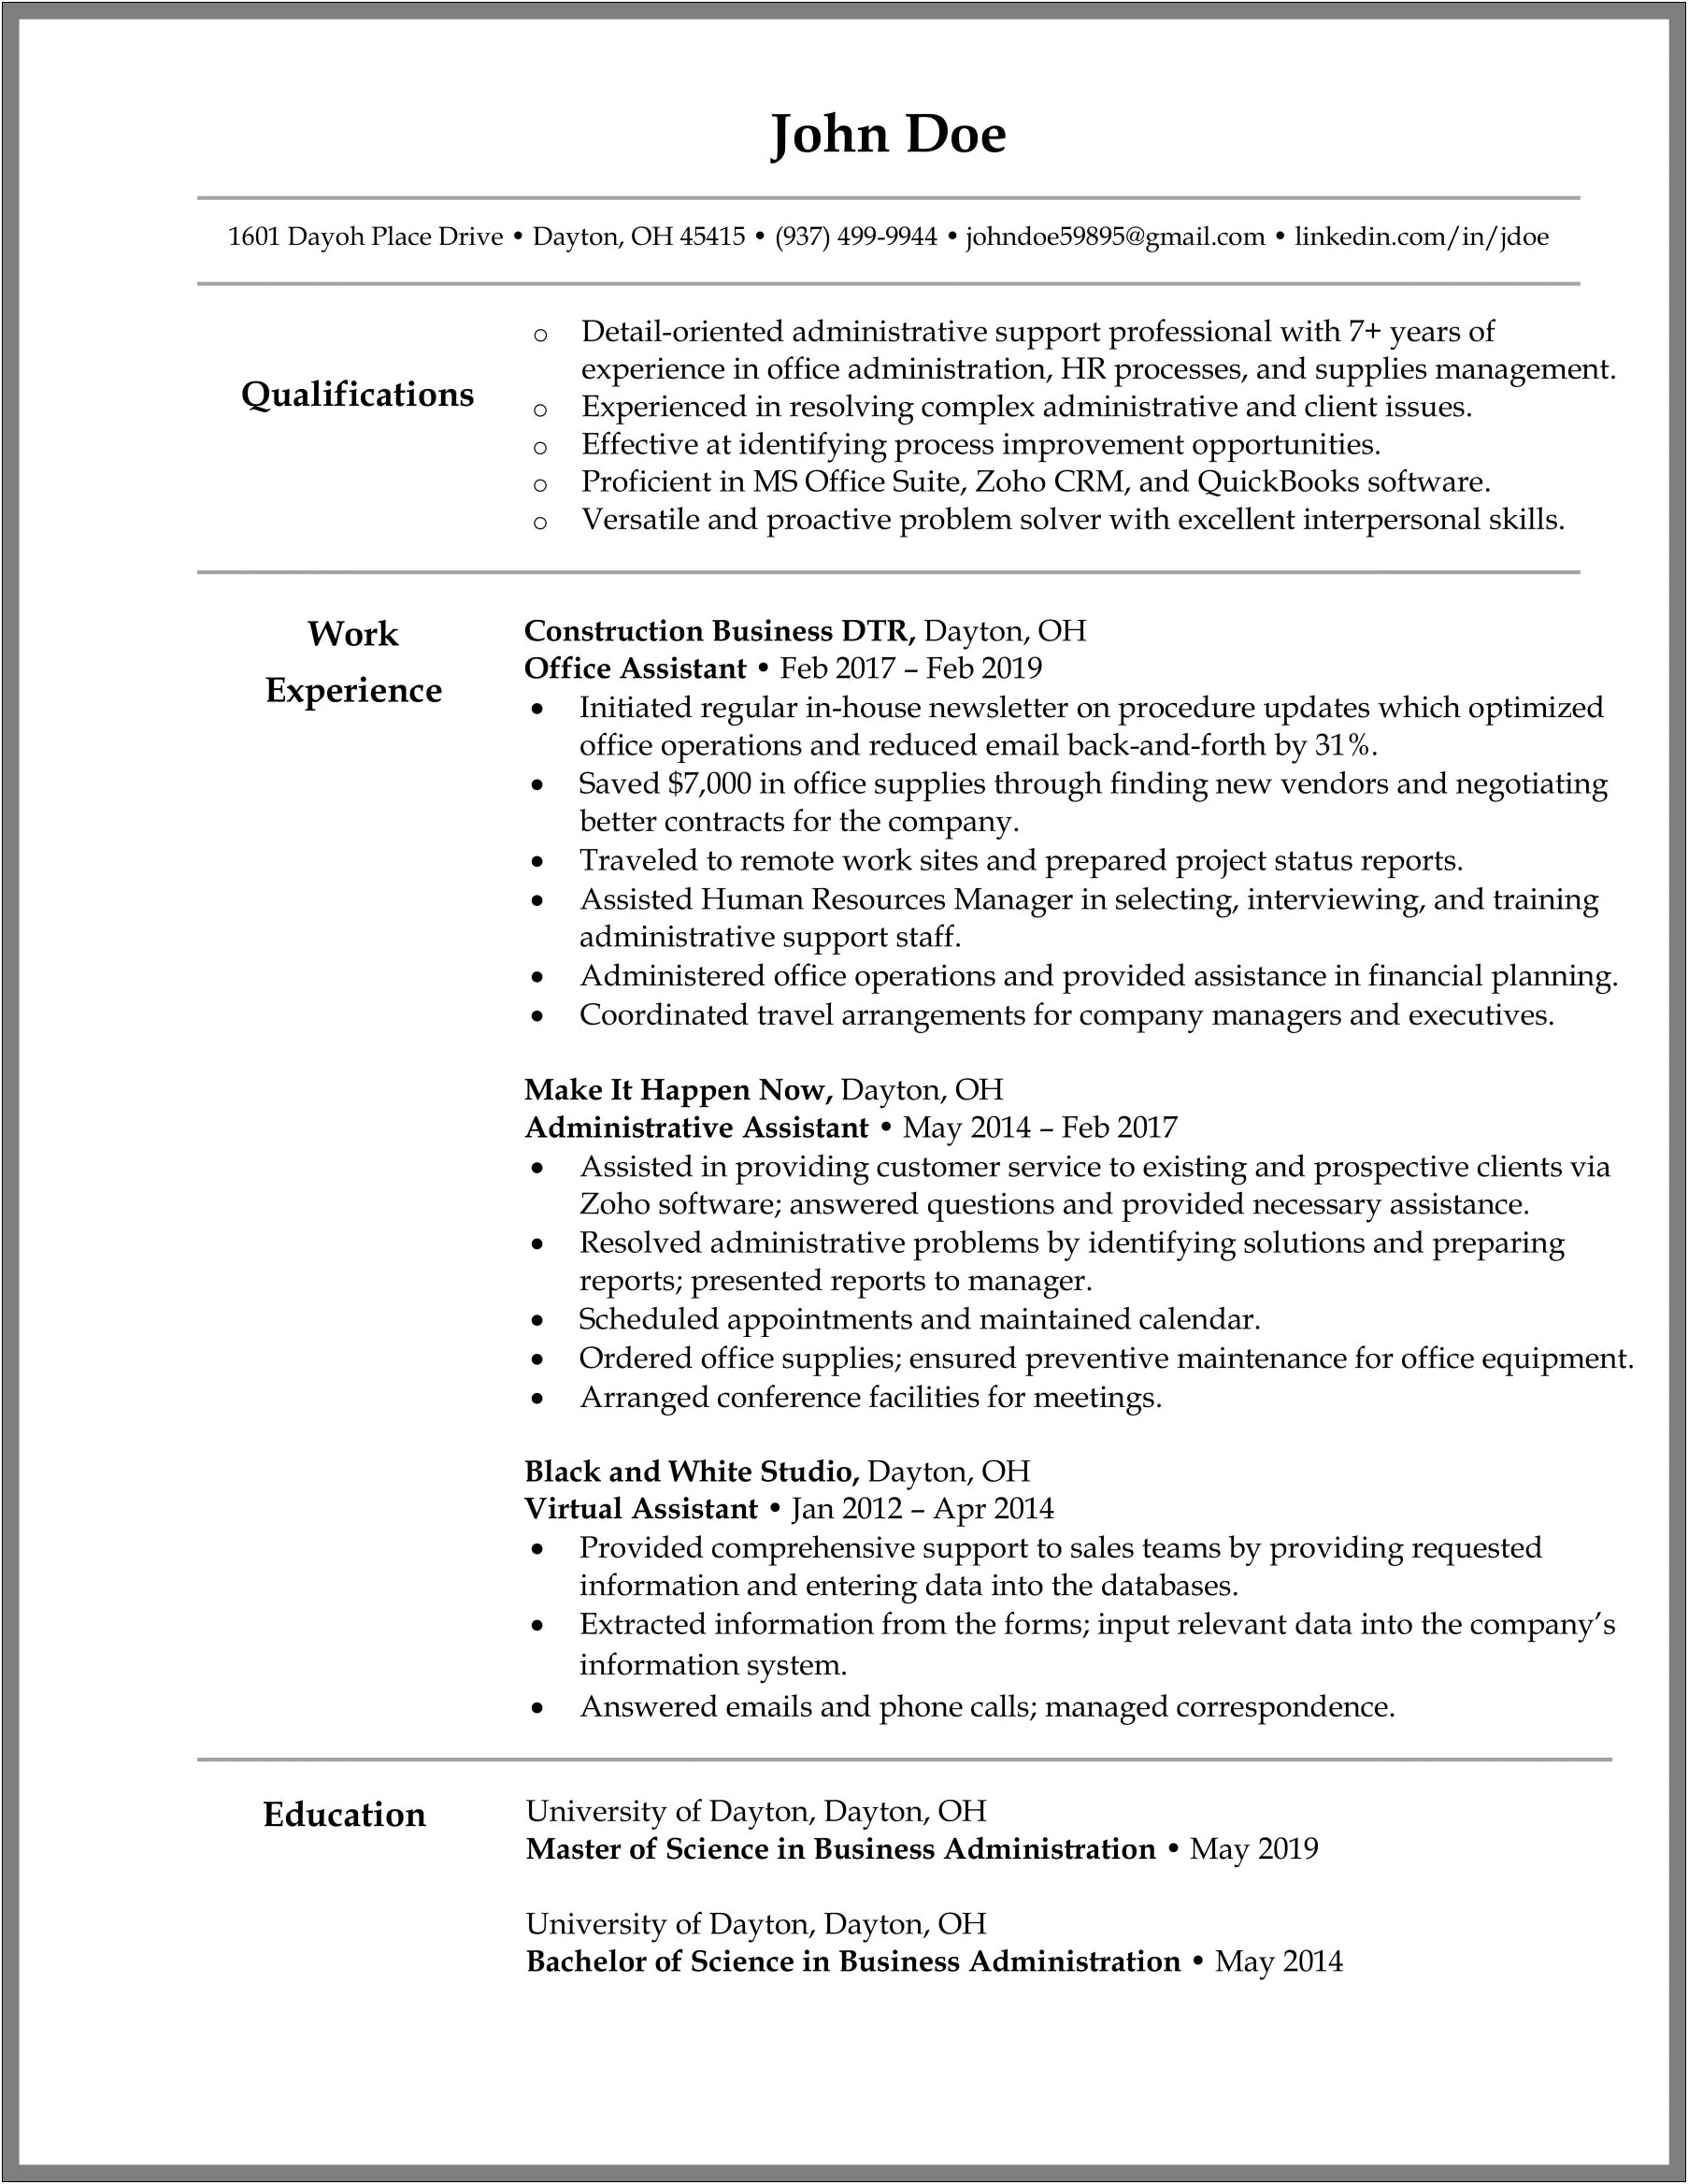 Skills And Expertise For A Administrative Resume